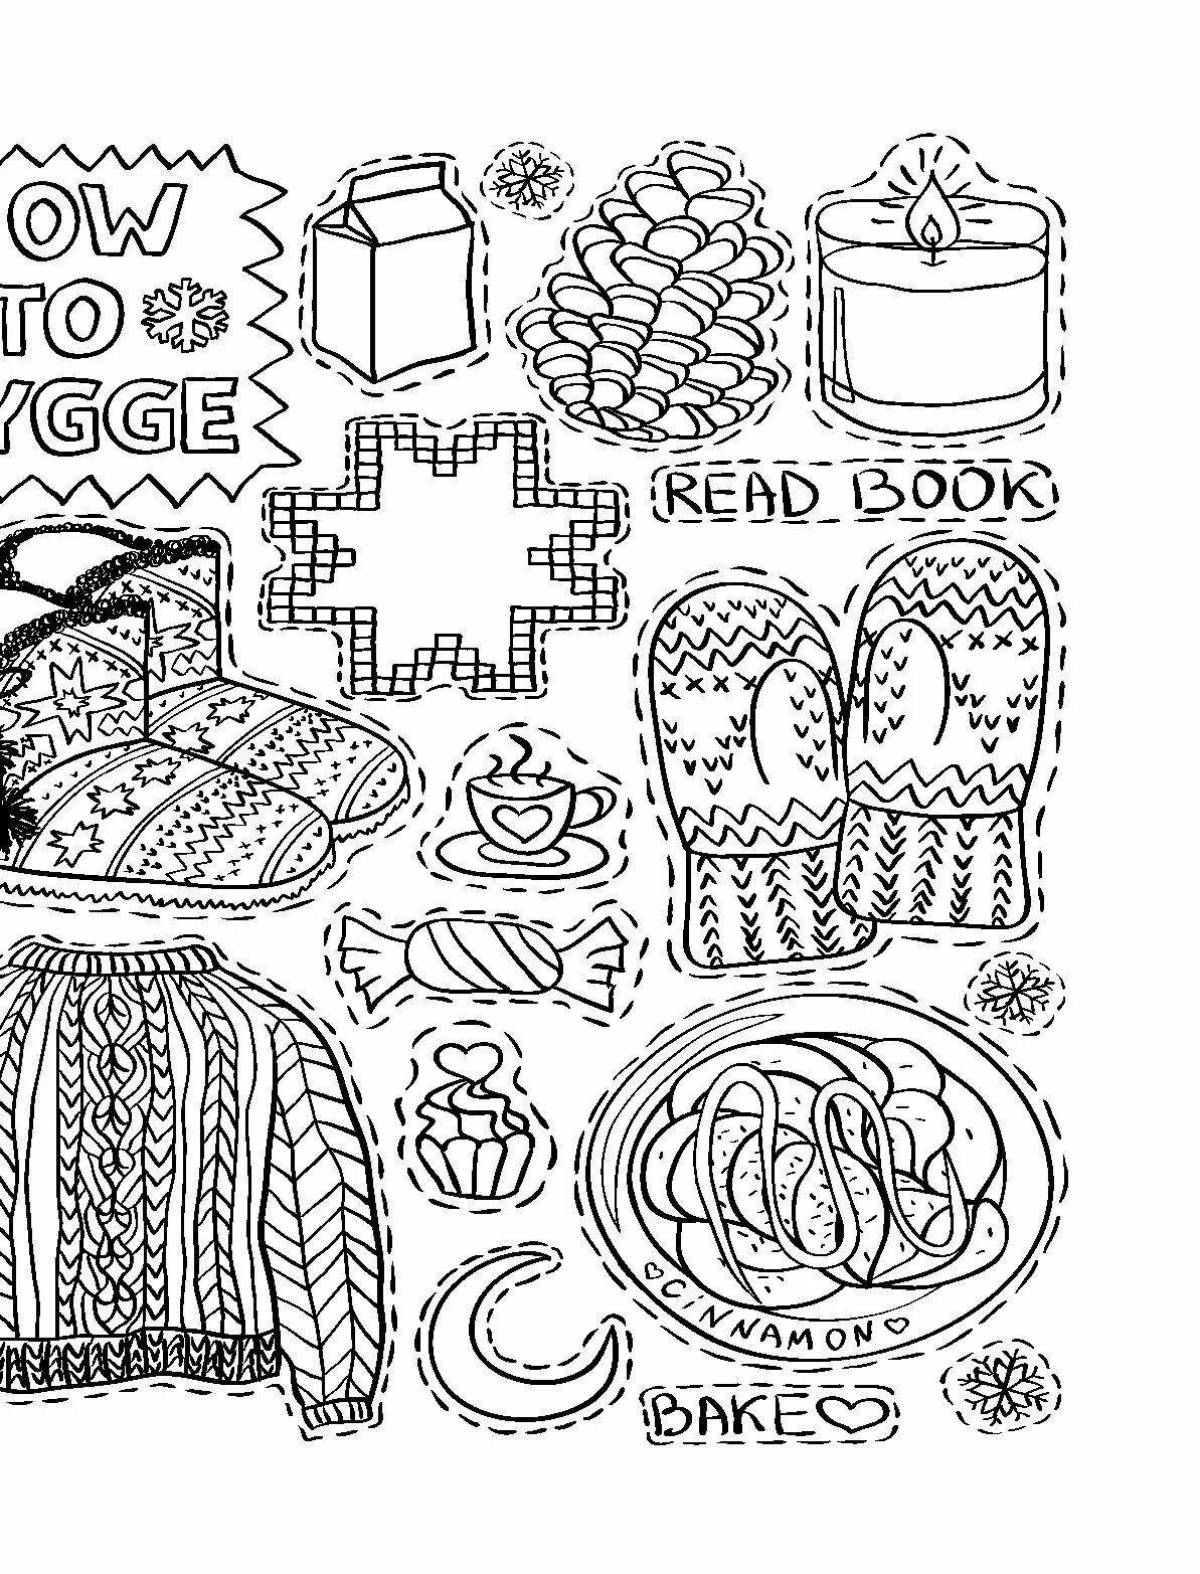 Hygge refreshing coloring book